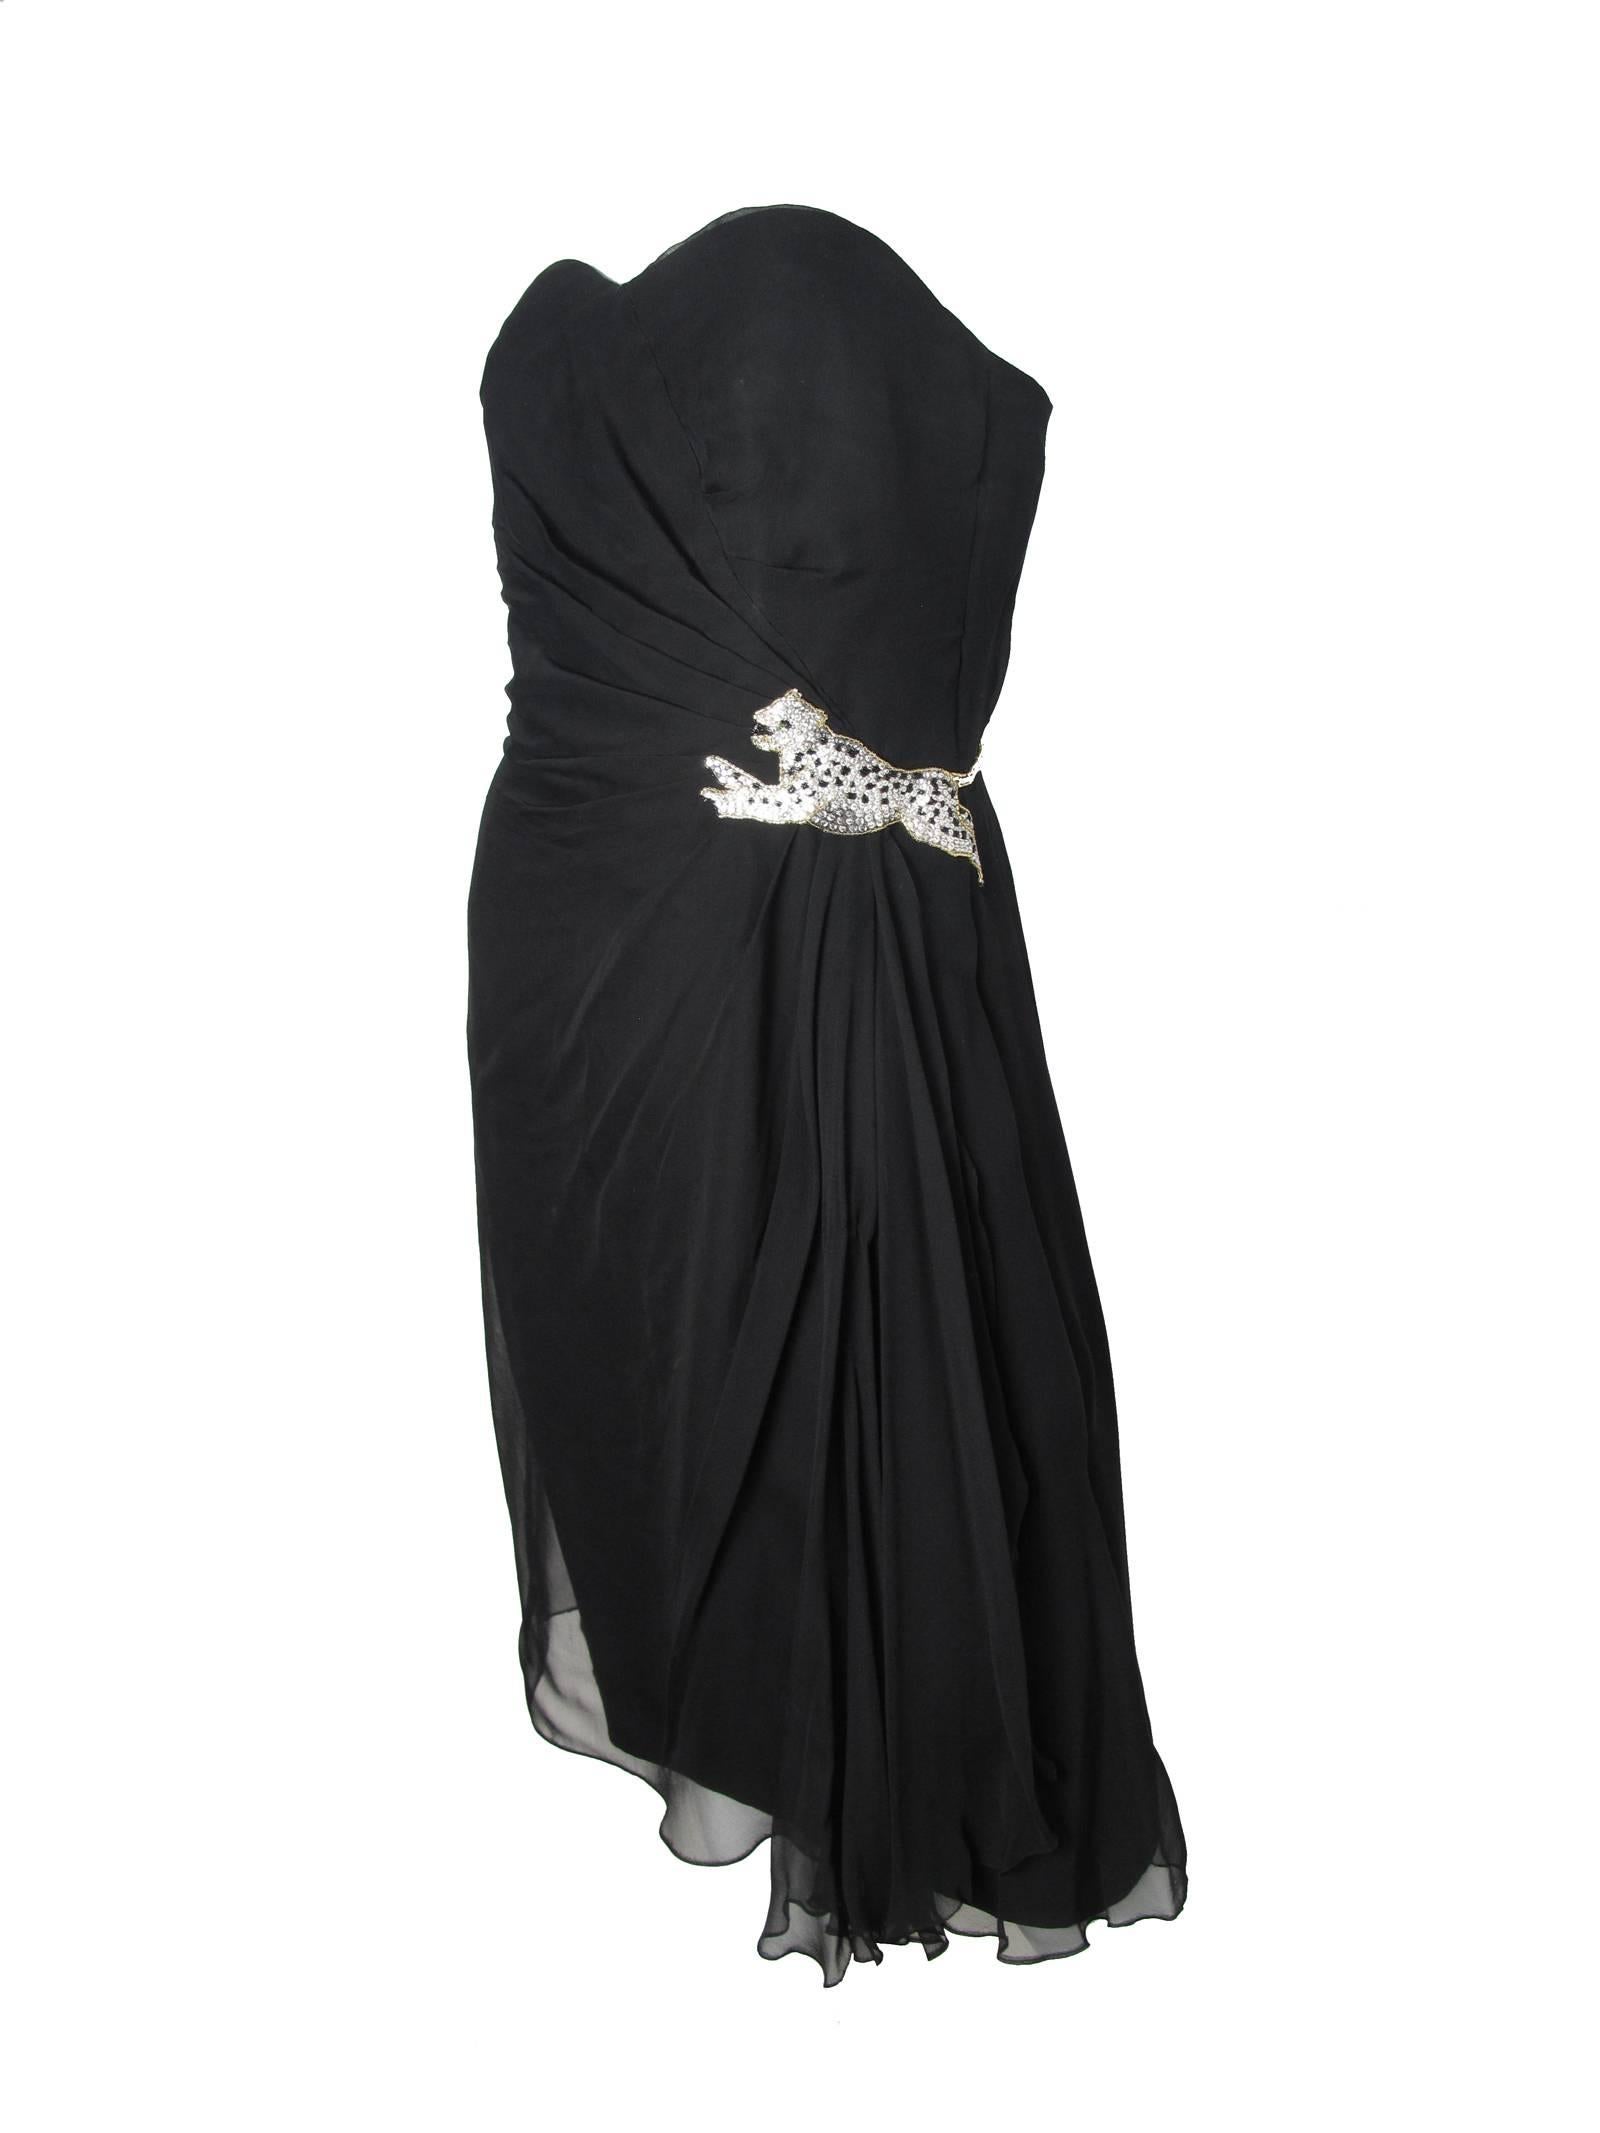 Numbered Scherrer black chiffon strapless cocktail dress with chiffon overlay. 
Condition: Very good. 33